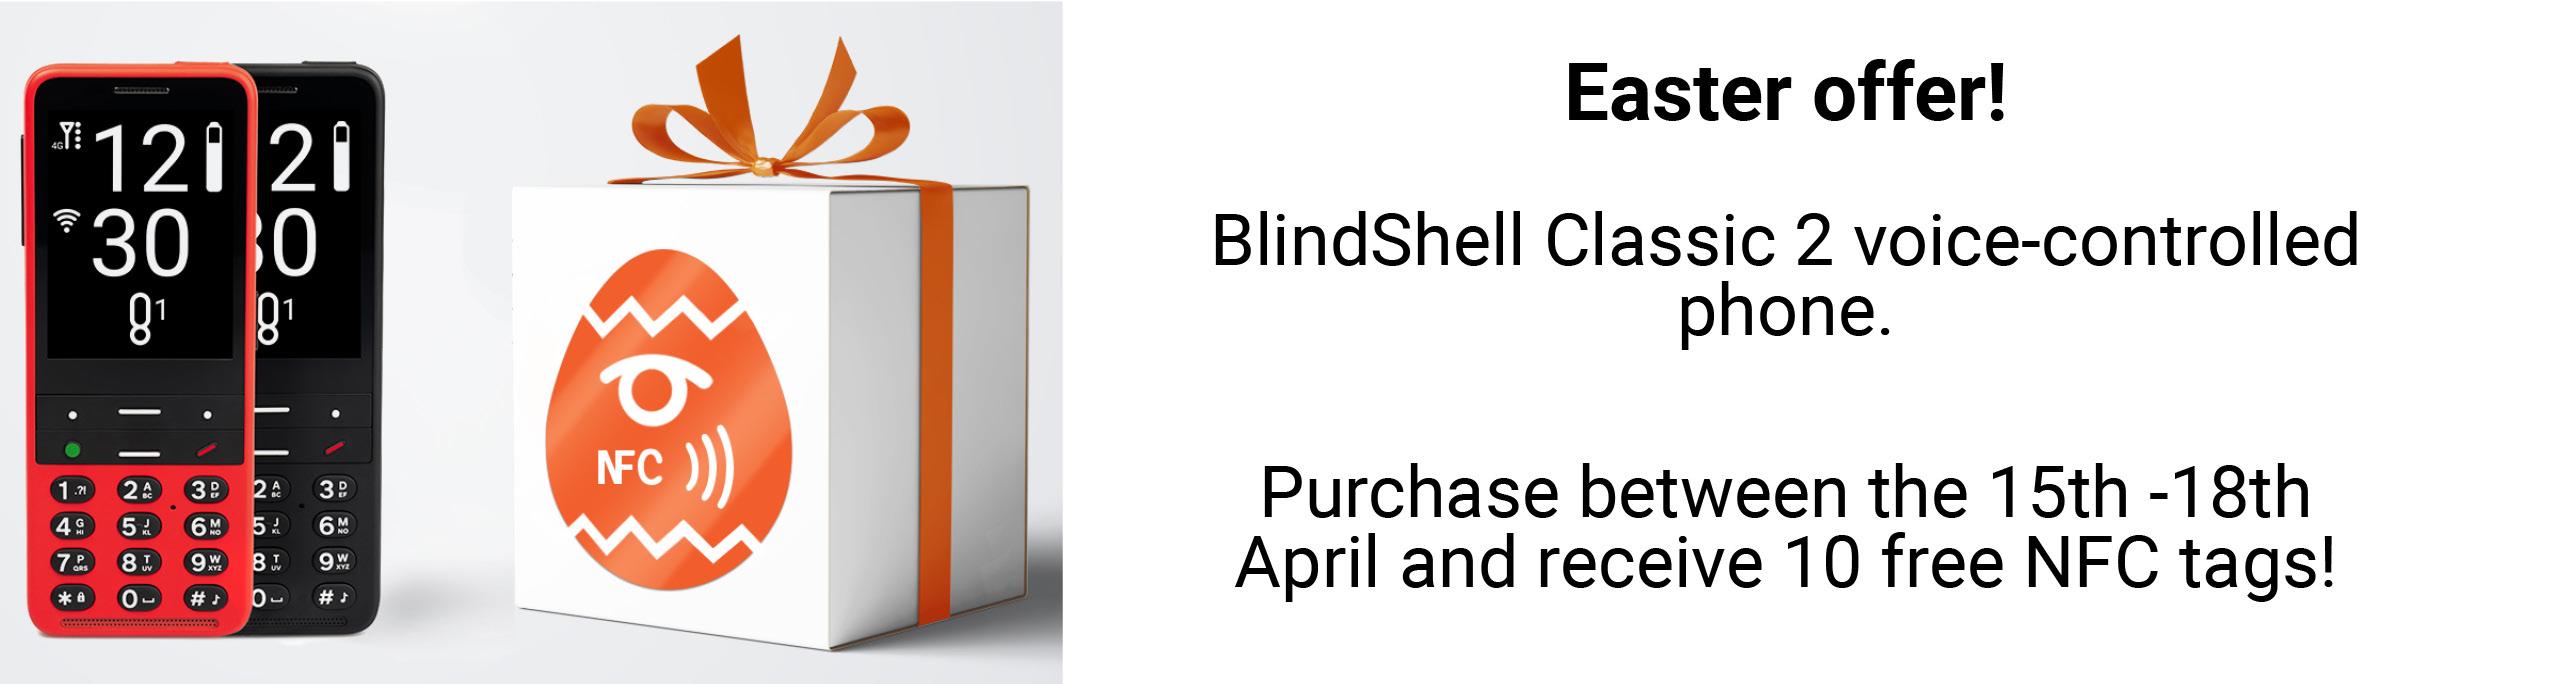 Image shows two BlindShell Classic 2 mobile phones, one in red and one in black with a white parcel next to it with orange ribbon and an orange easter egg on the front with the blindShell logo and NFC inside. The text reads Easter offer! BlindShell Classic 2 voice-controlled phone. Purchase between the 15th-18th April and receive 10 free NFC tags!